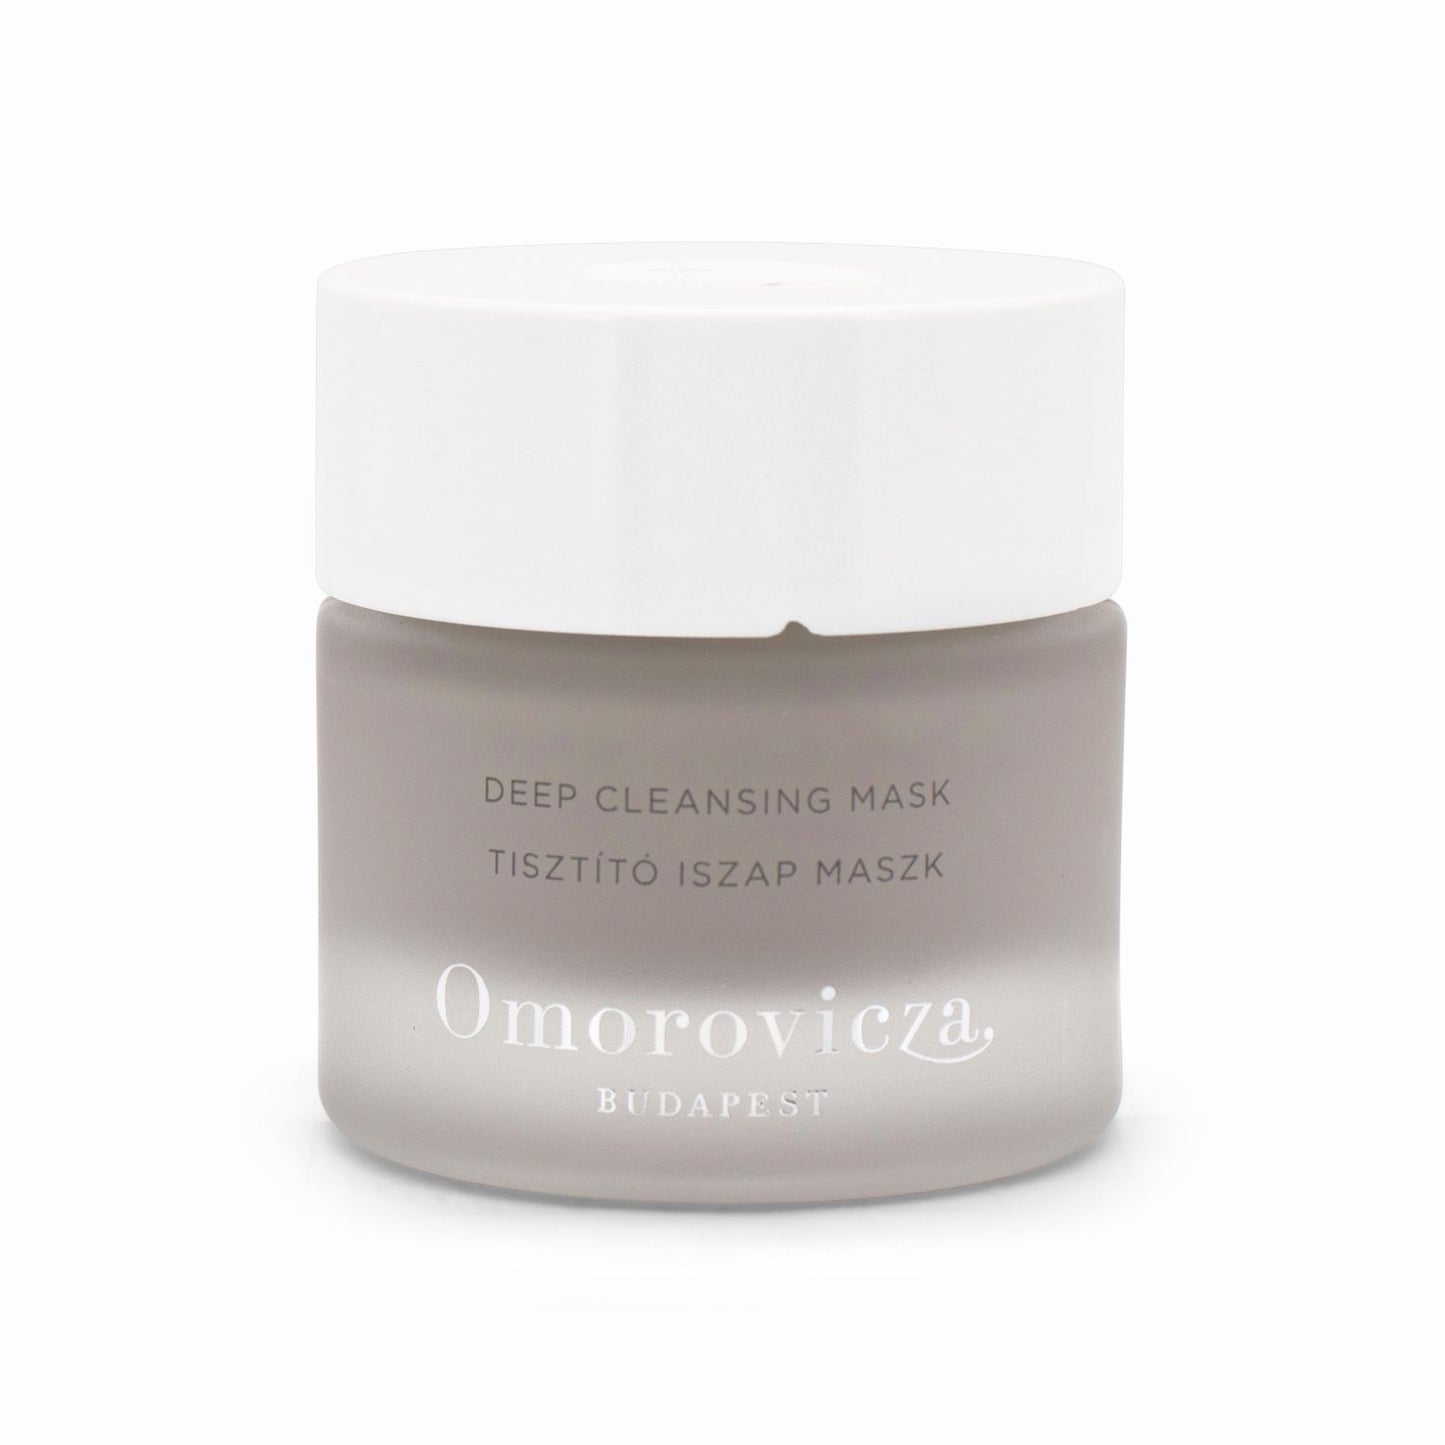 Omorovicza Deep Cleansing Facial Mask 50ml -  Imperfect Box & Damaged Lid